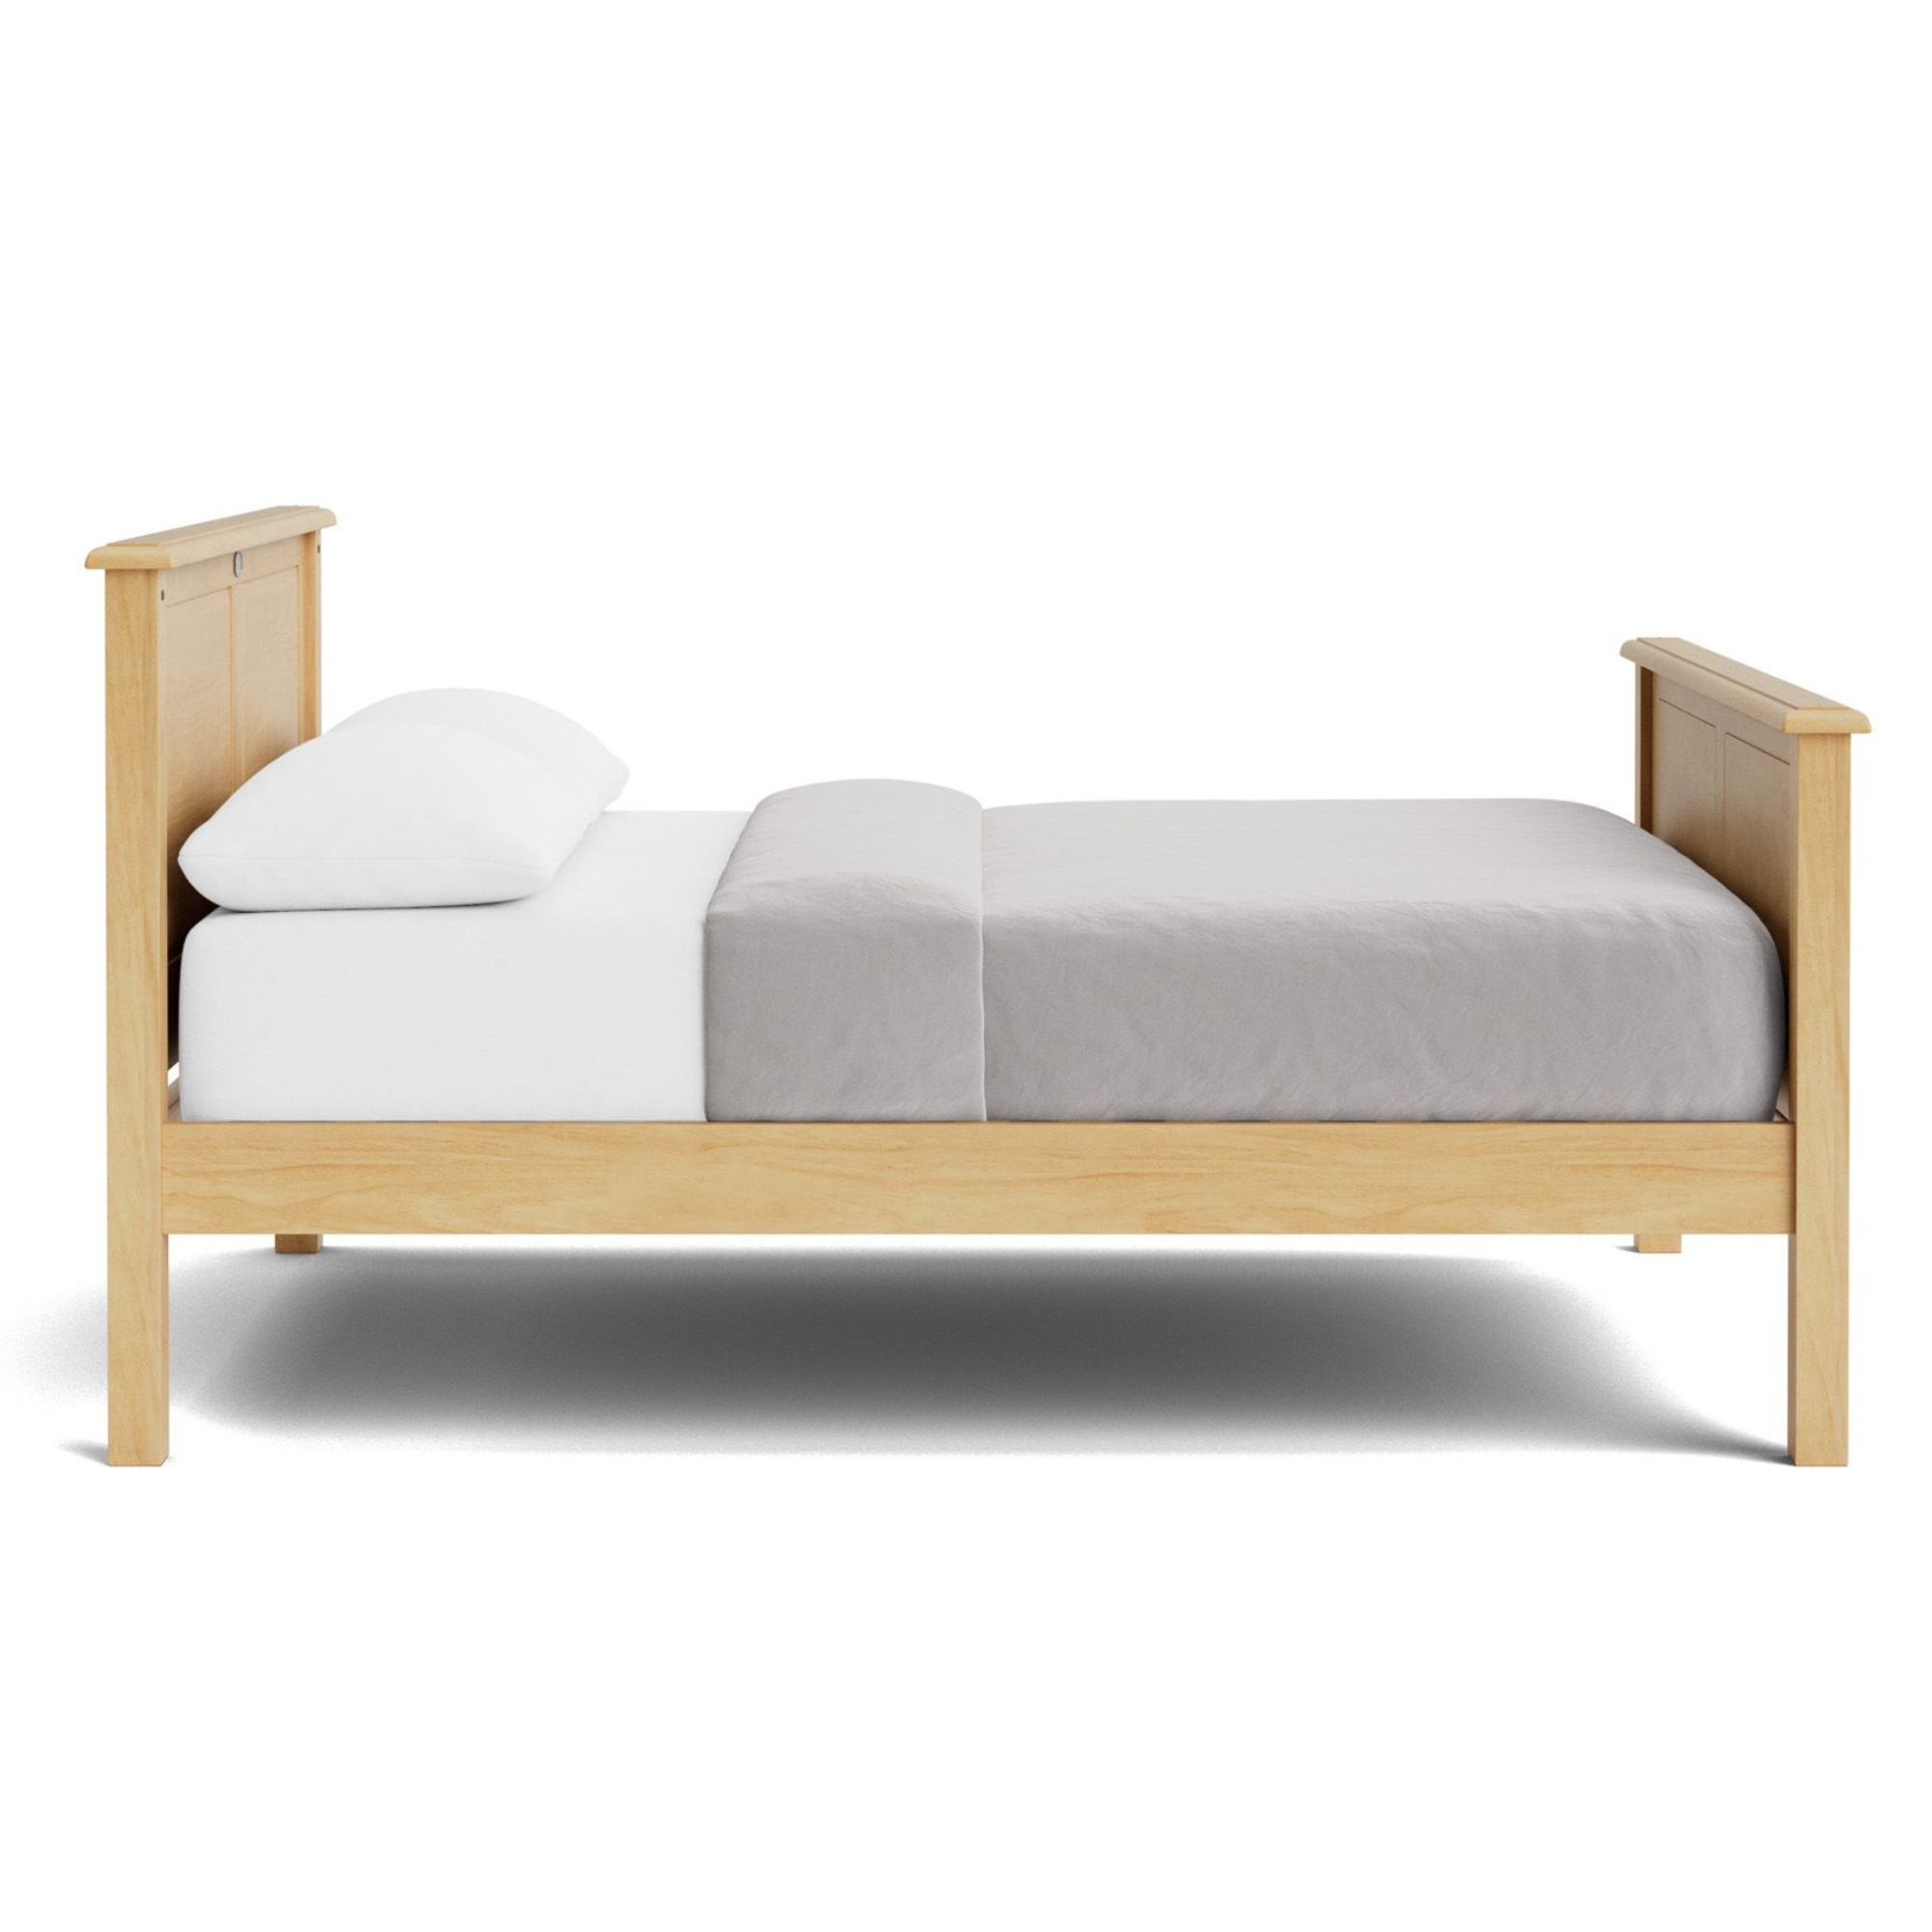 VILLAGER SLAT BED WITH HIGH FOOT | ALL SIZES | NZ MADE